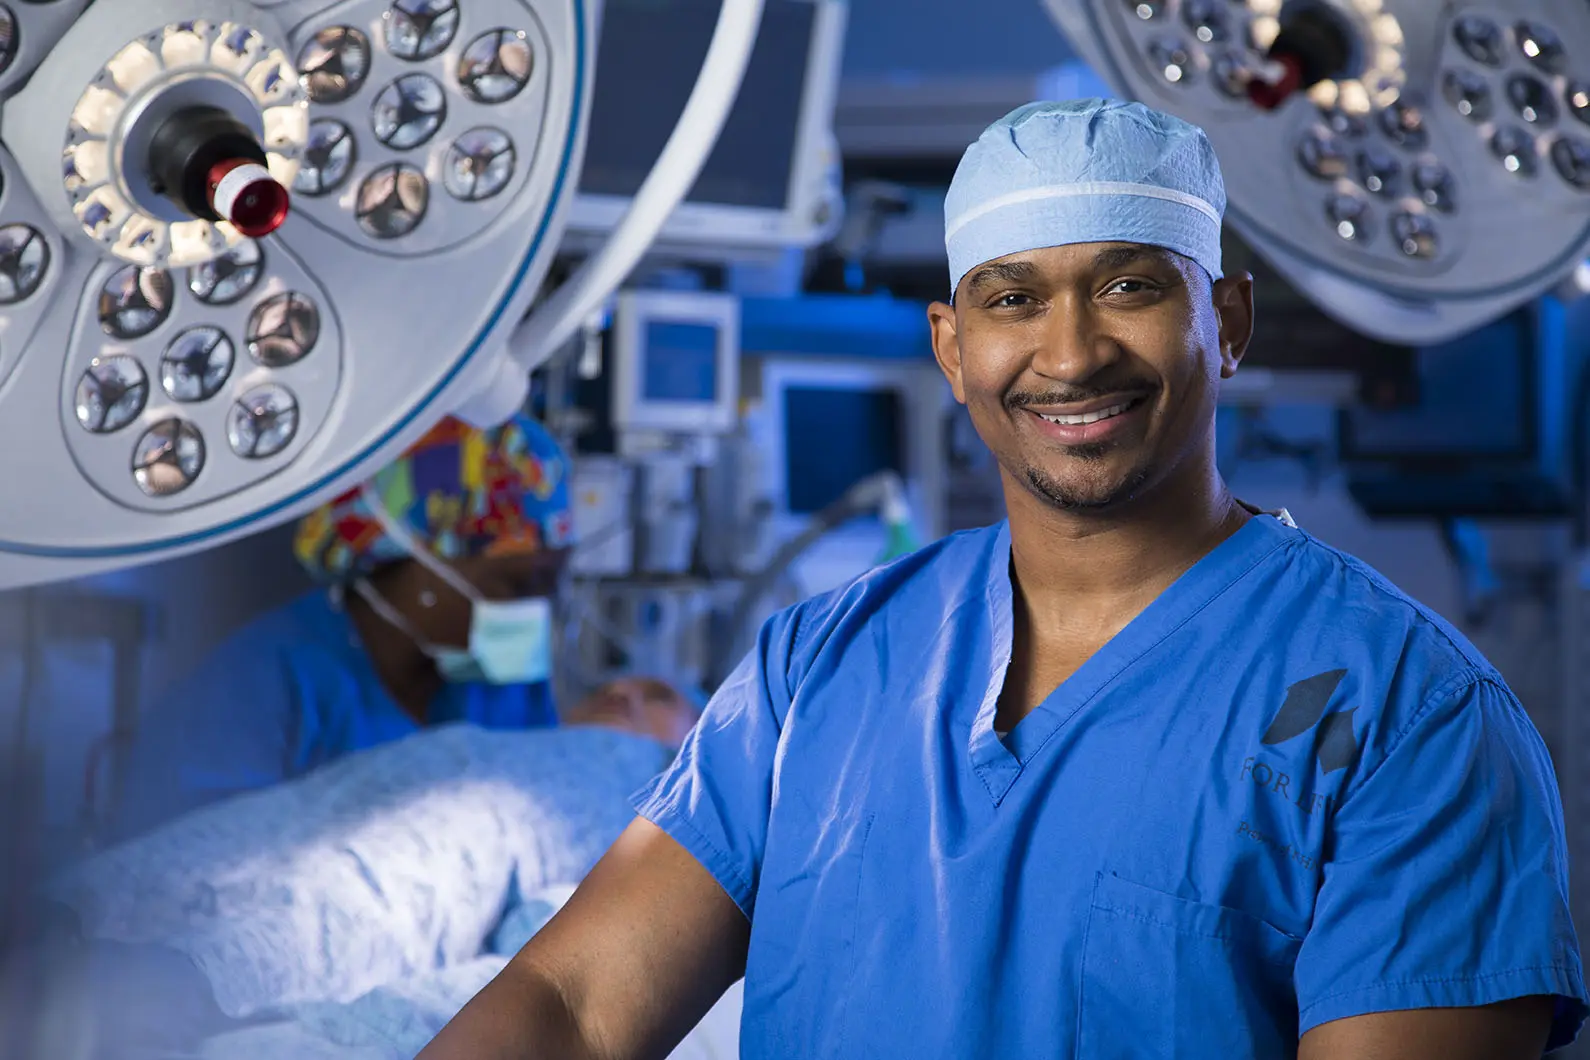 A medical professional in an operating room